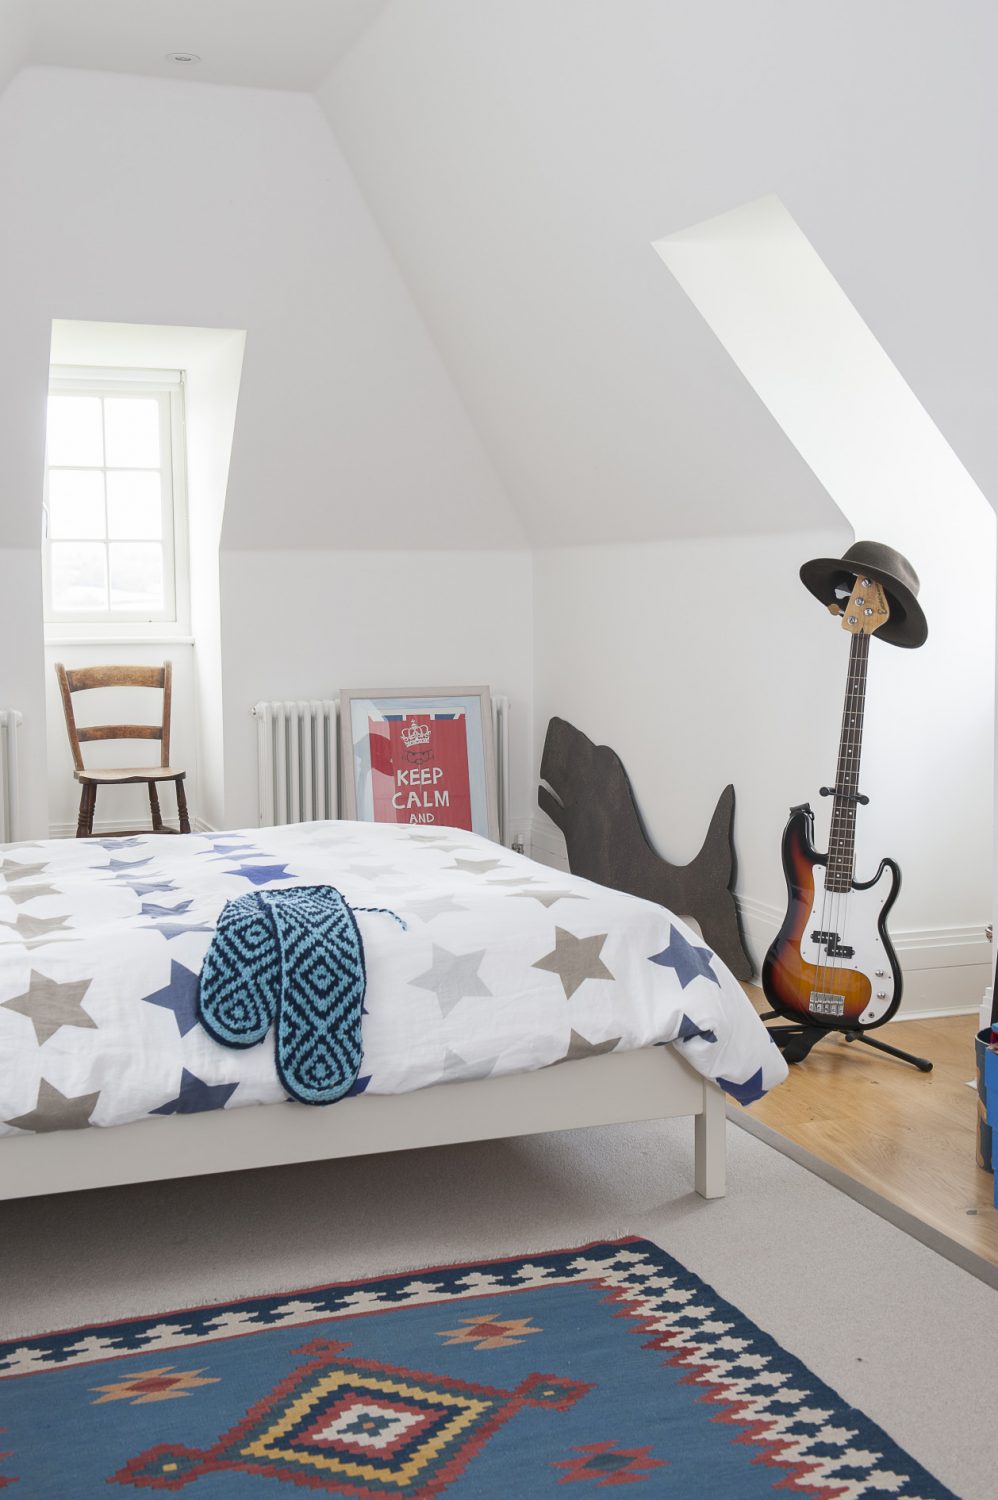 Rooflight windows mean that the children’s attic rooms are anything but dark and dingy